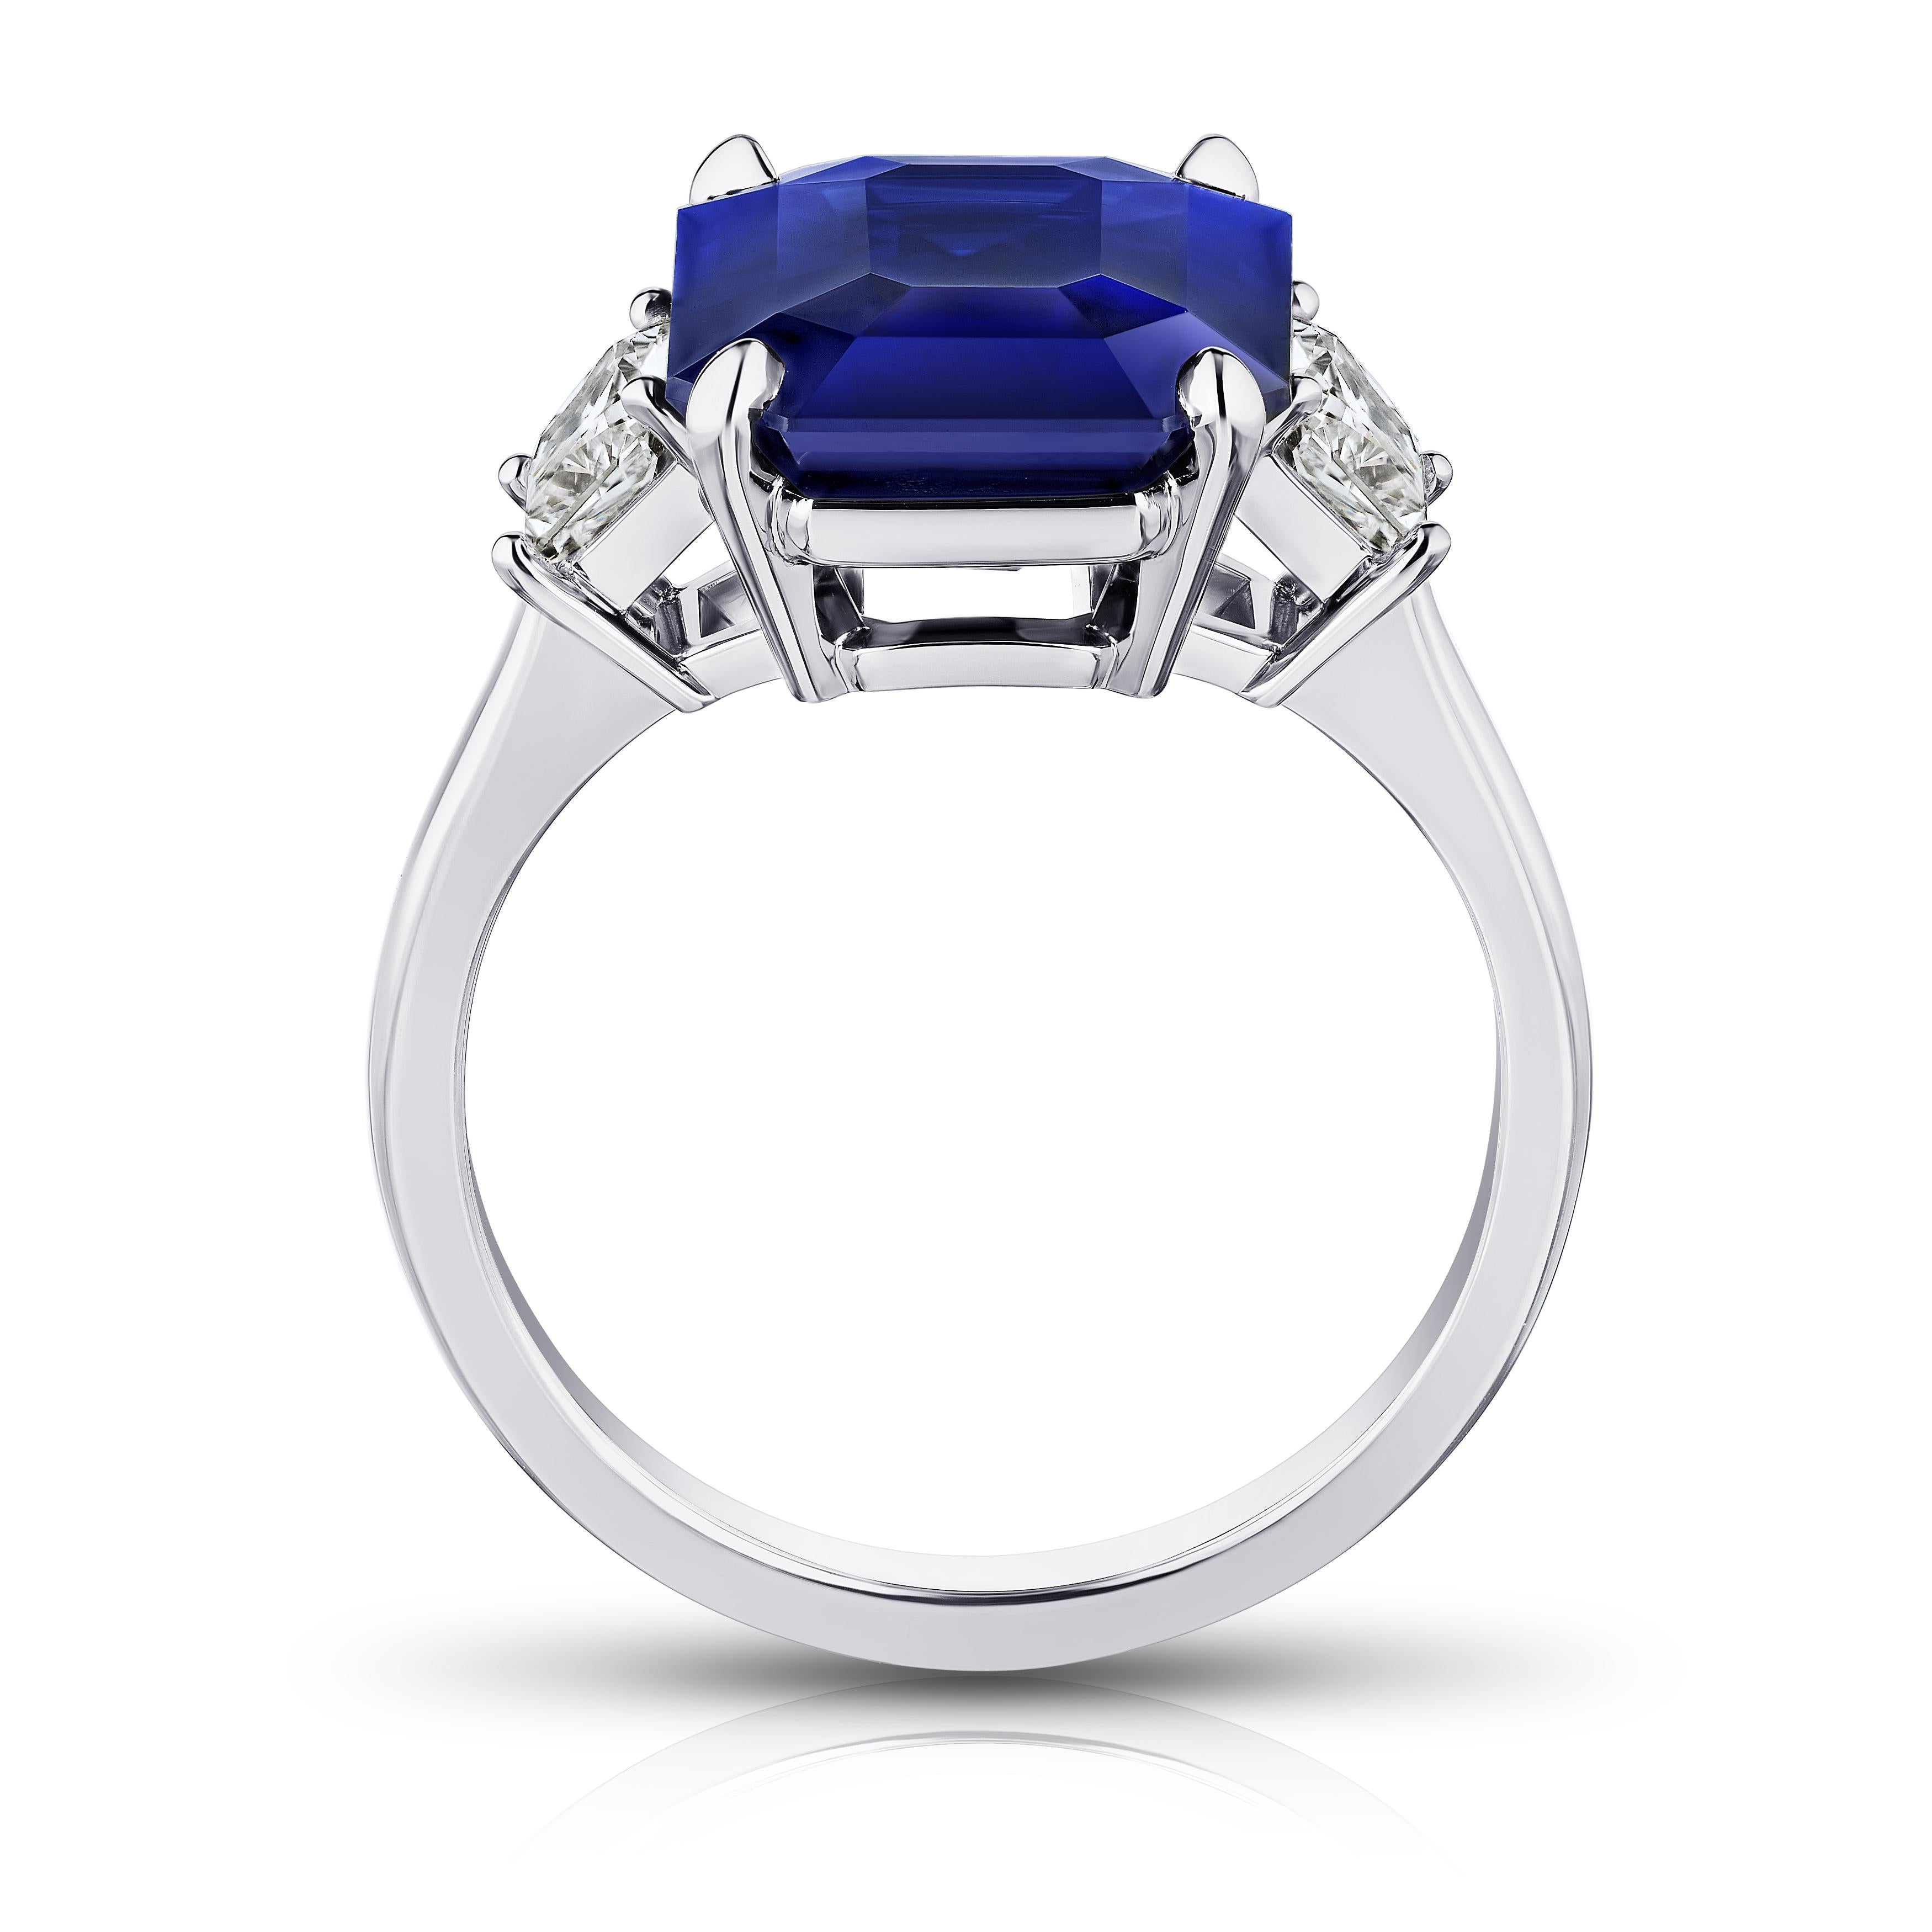 7.30 carat emerald cut blue sapphire with tapered radiant cut diamonds .79 carats set in a platinum ring. Size 7.